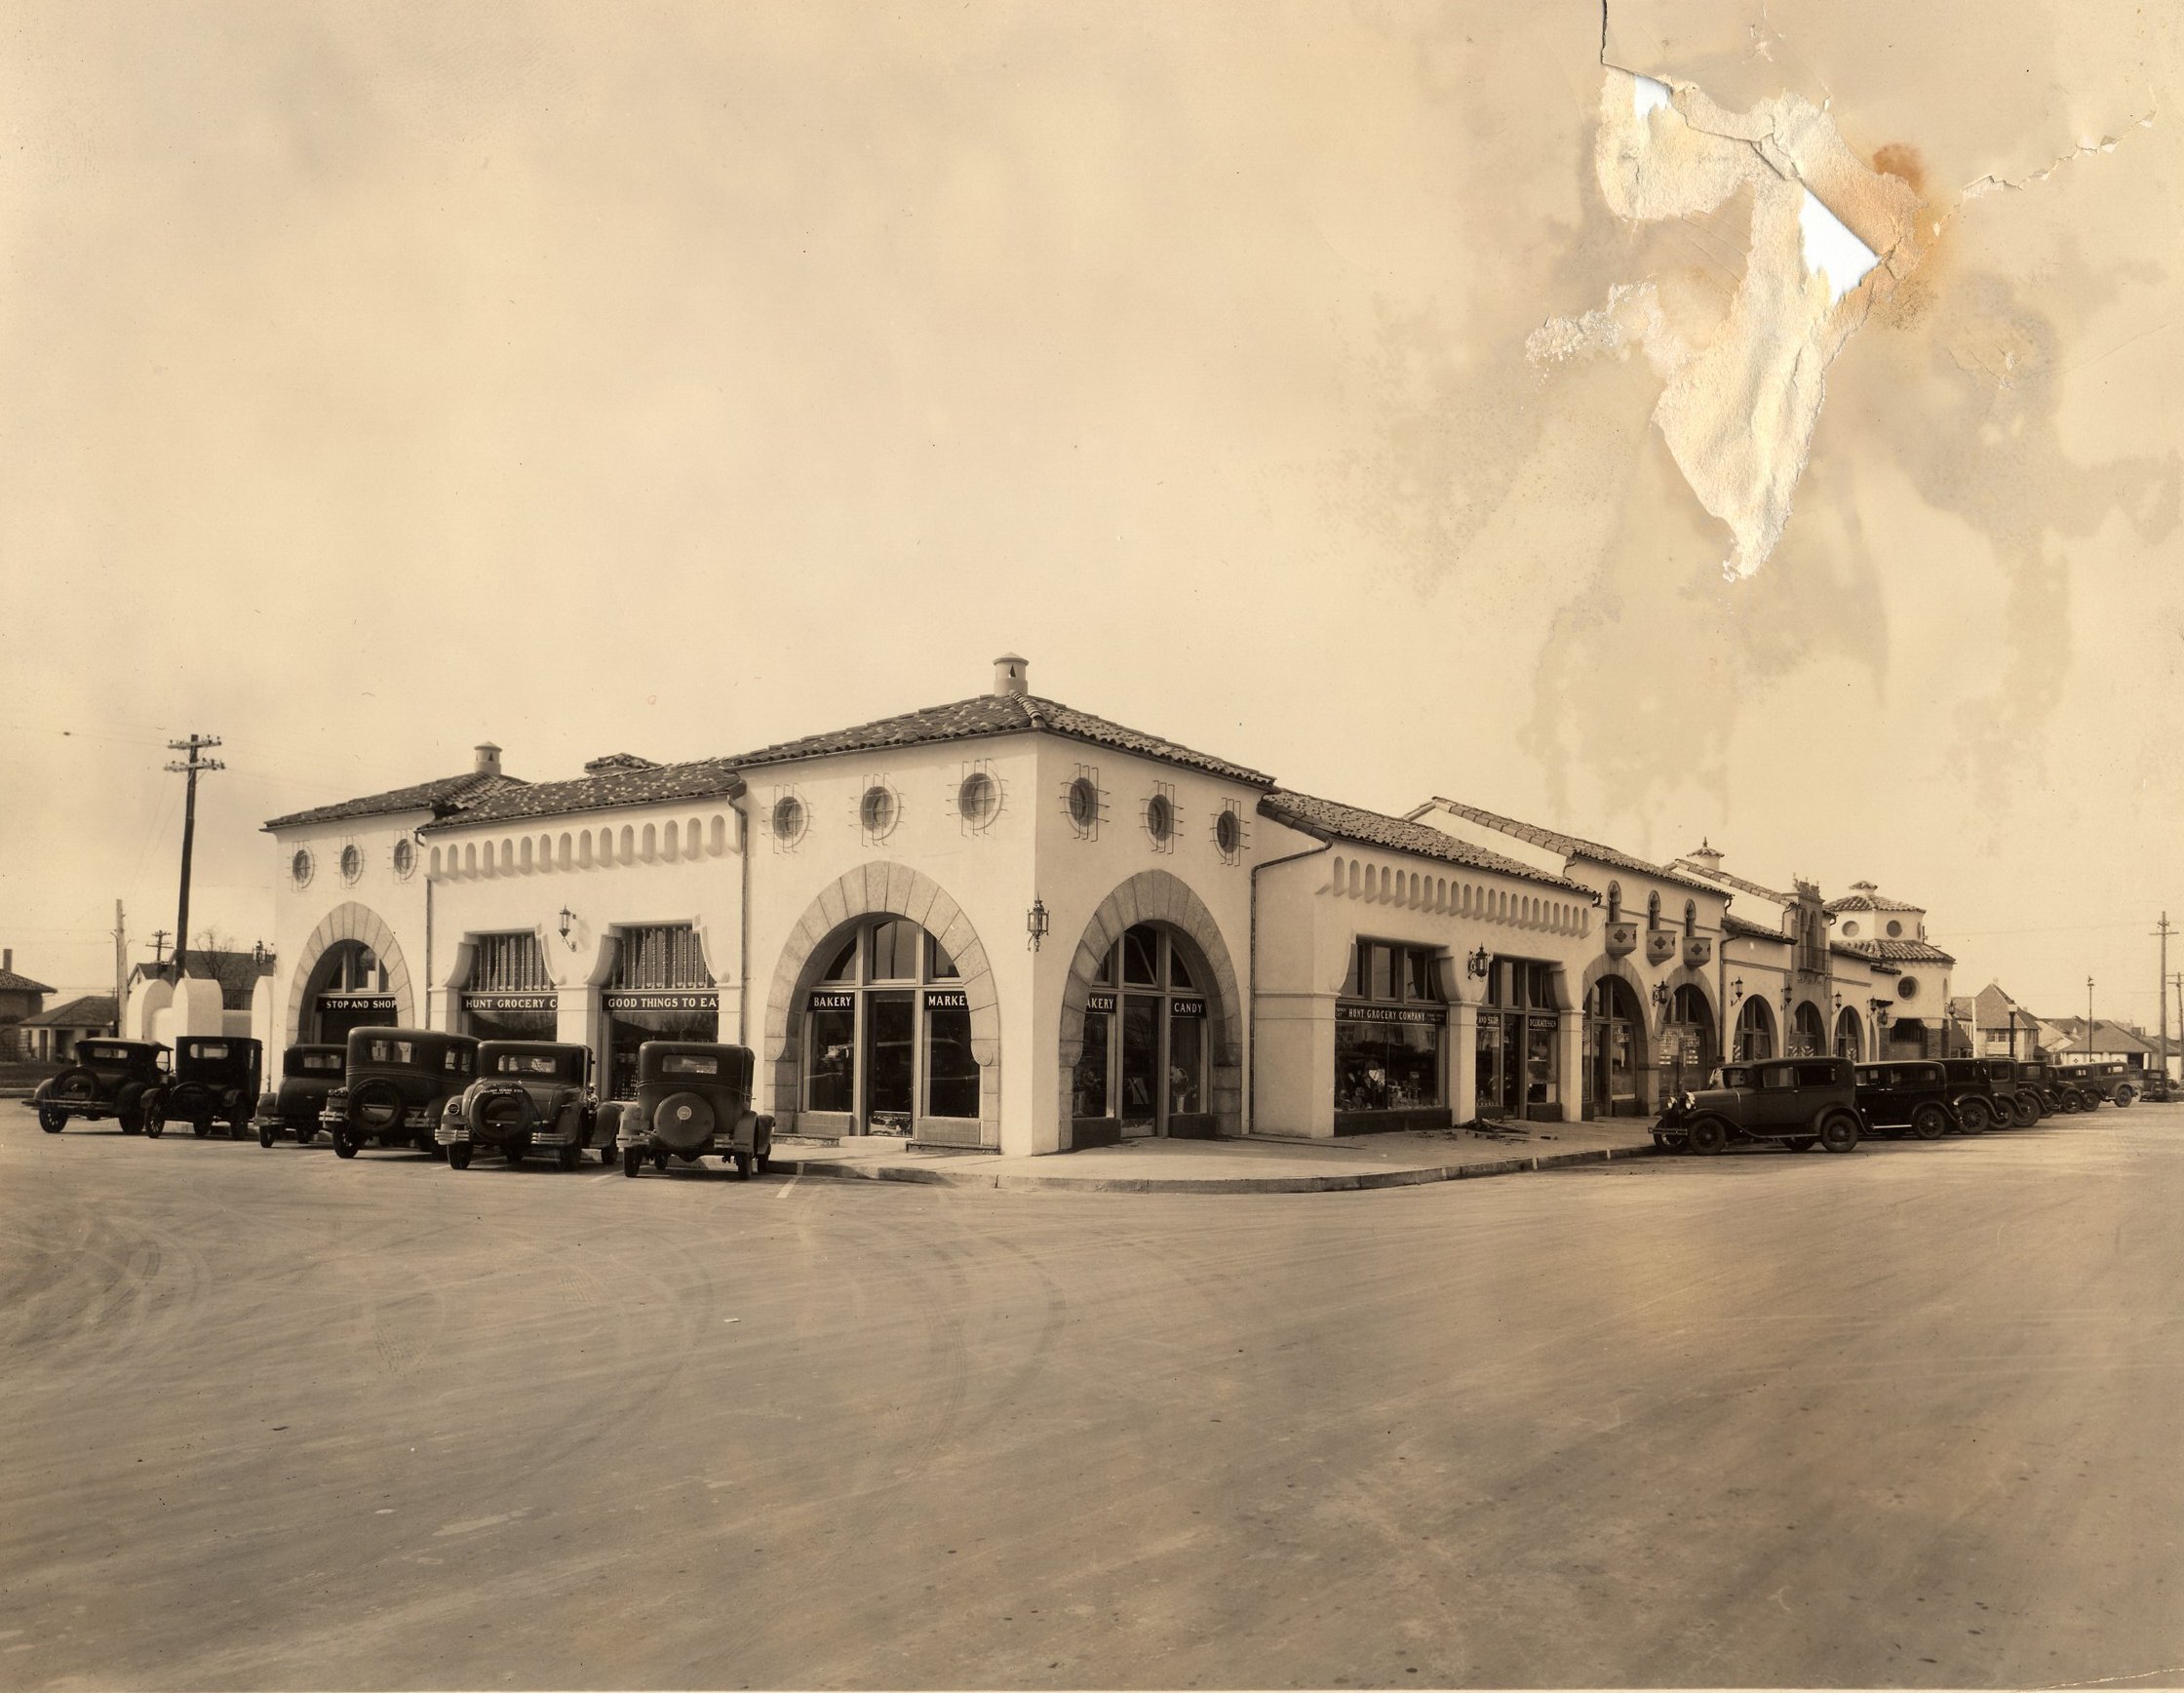 Step back in time: Historical photos of NorthPark Center - Preston Hollow